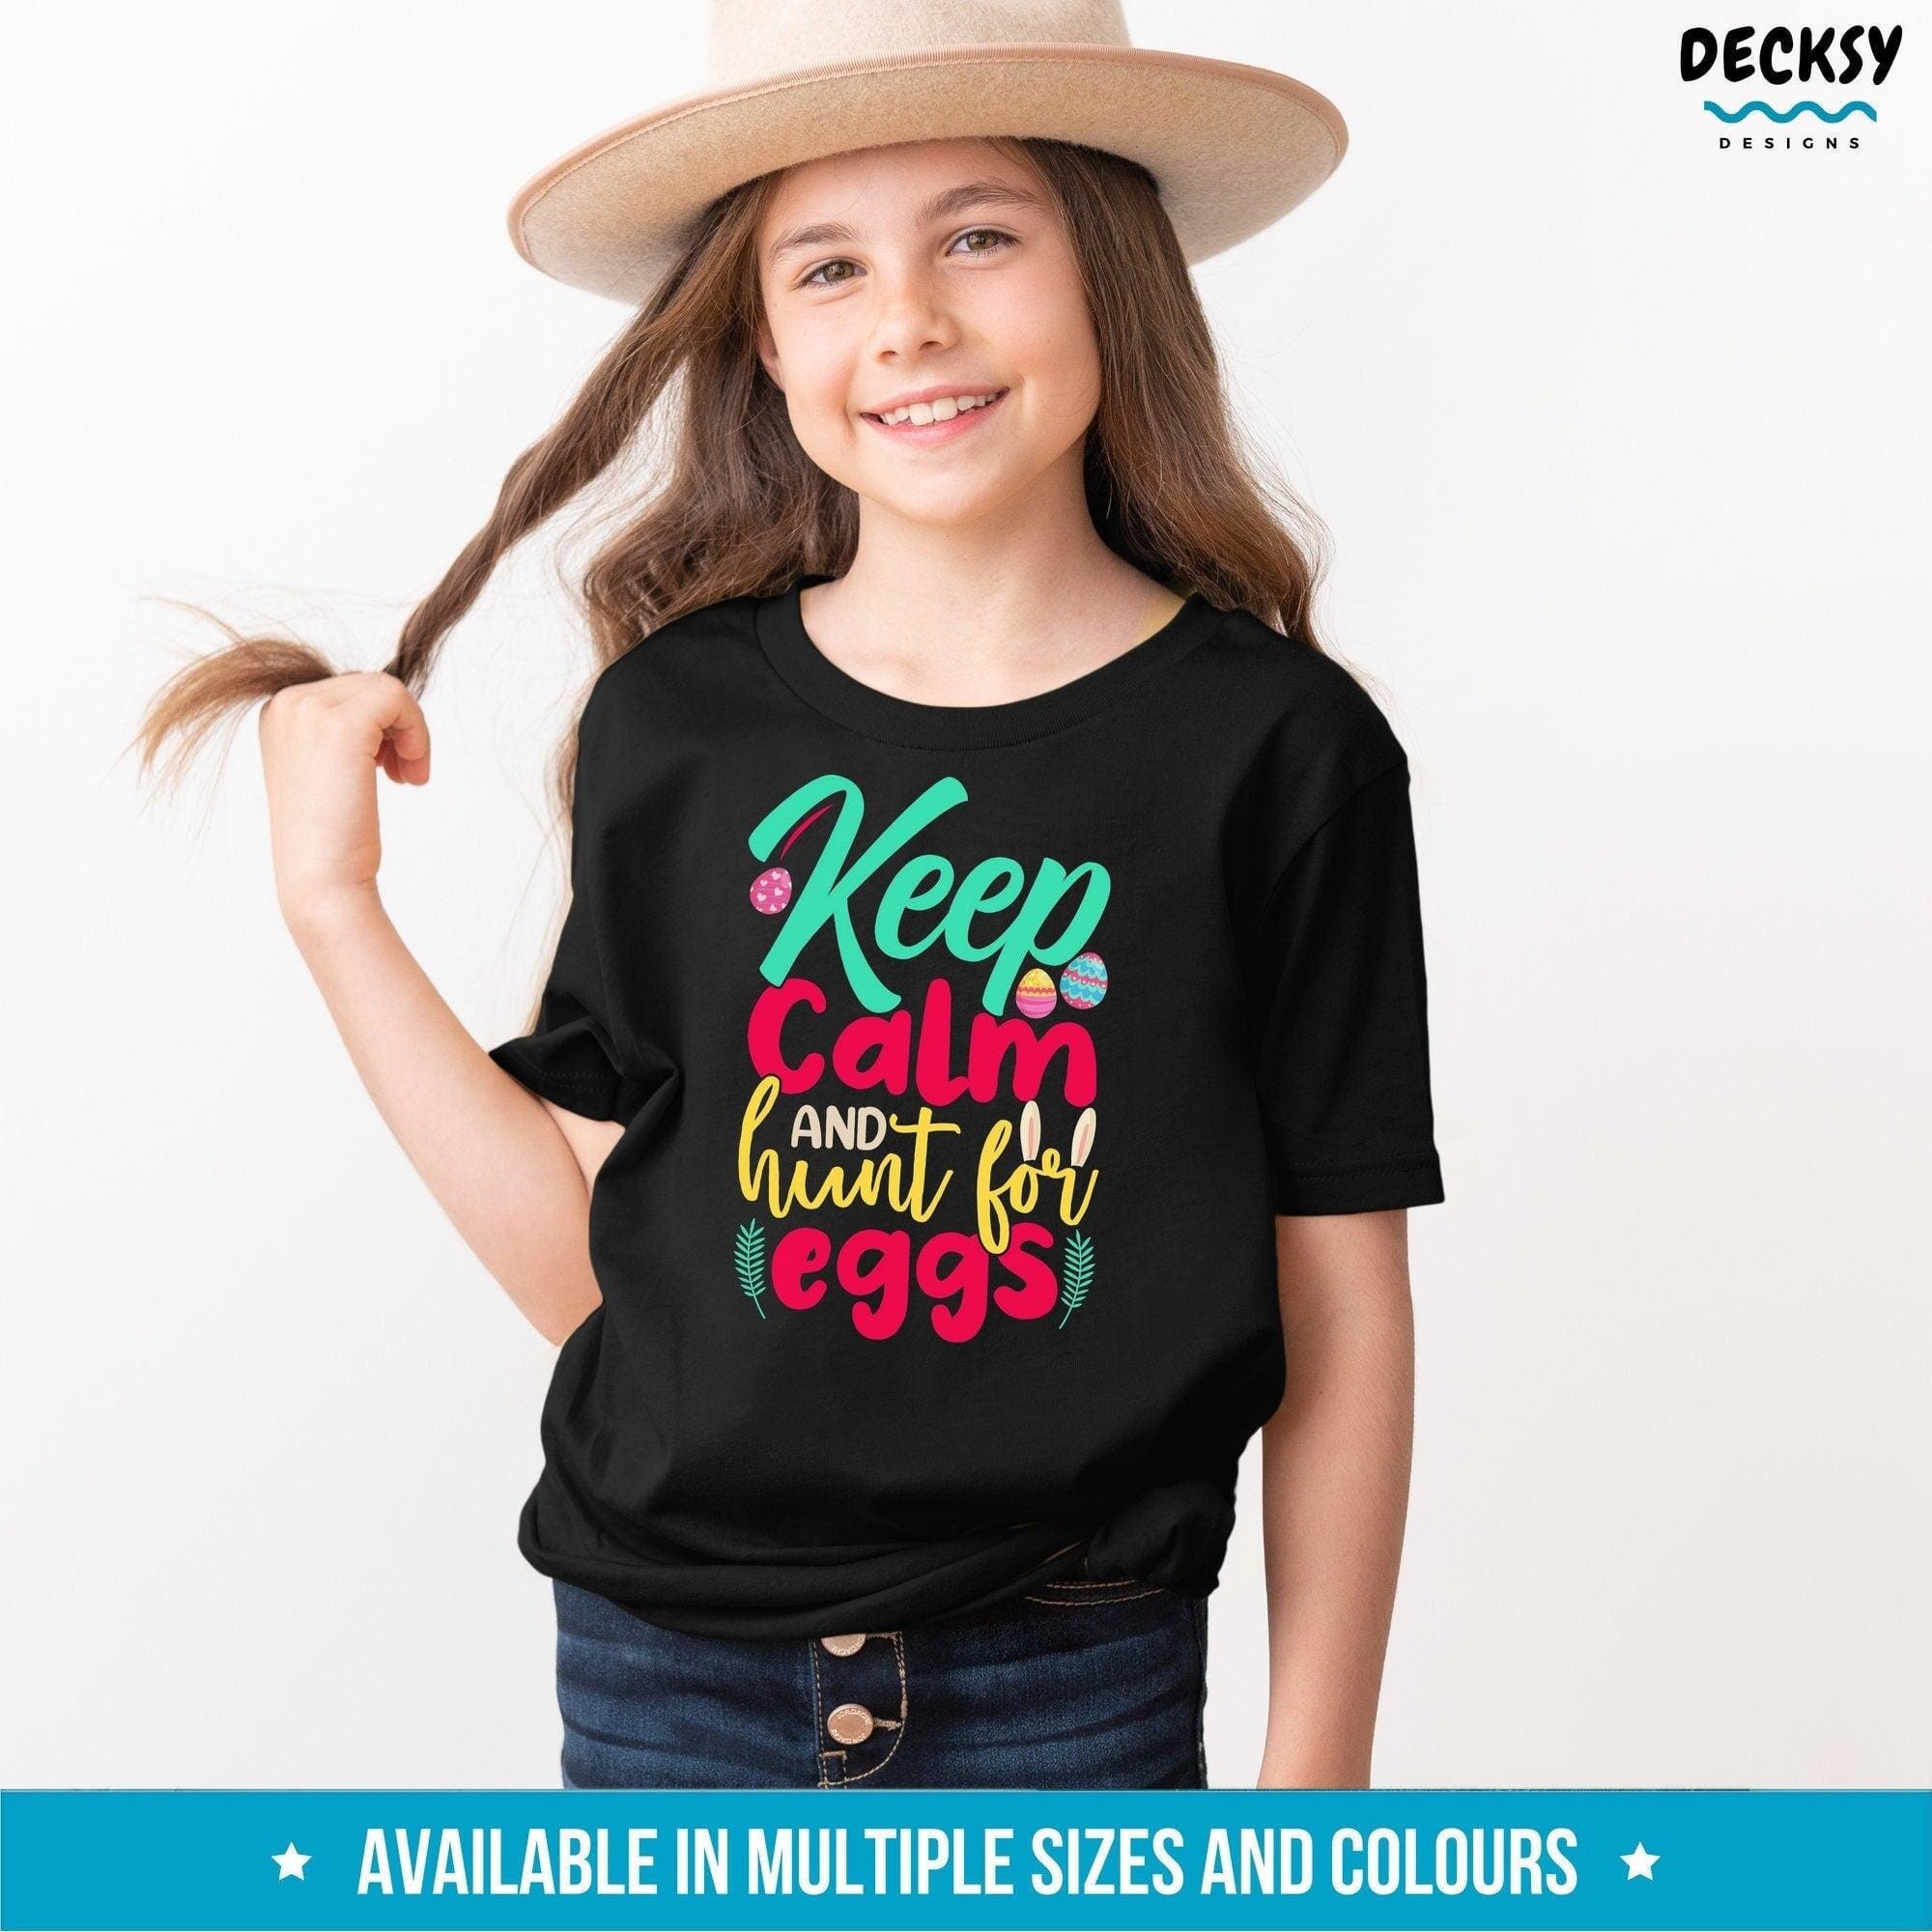 Easter Egg Hunt Shirt, Happy Easter Gift-Clothing:Gender-Neutral Adult Clothing:Tops & Tees:T-shirts:Graphic Tees-DecksyDesigns